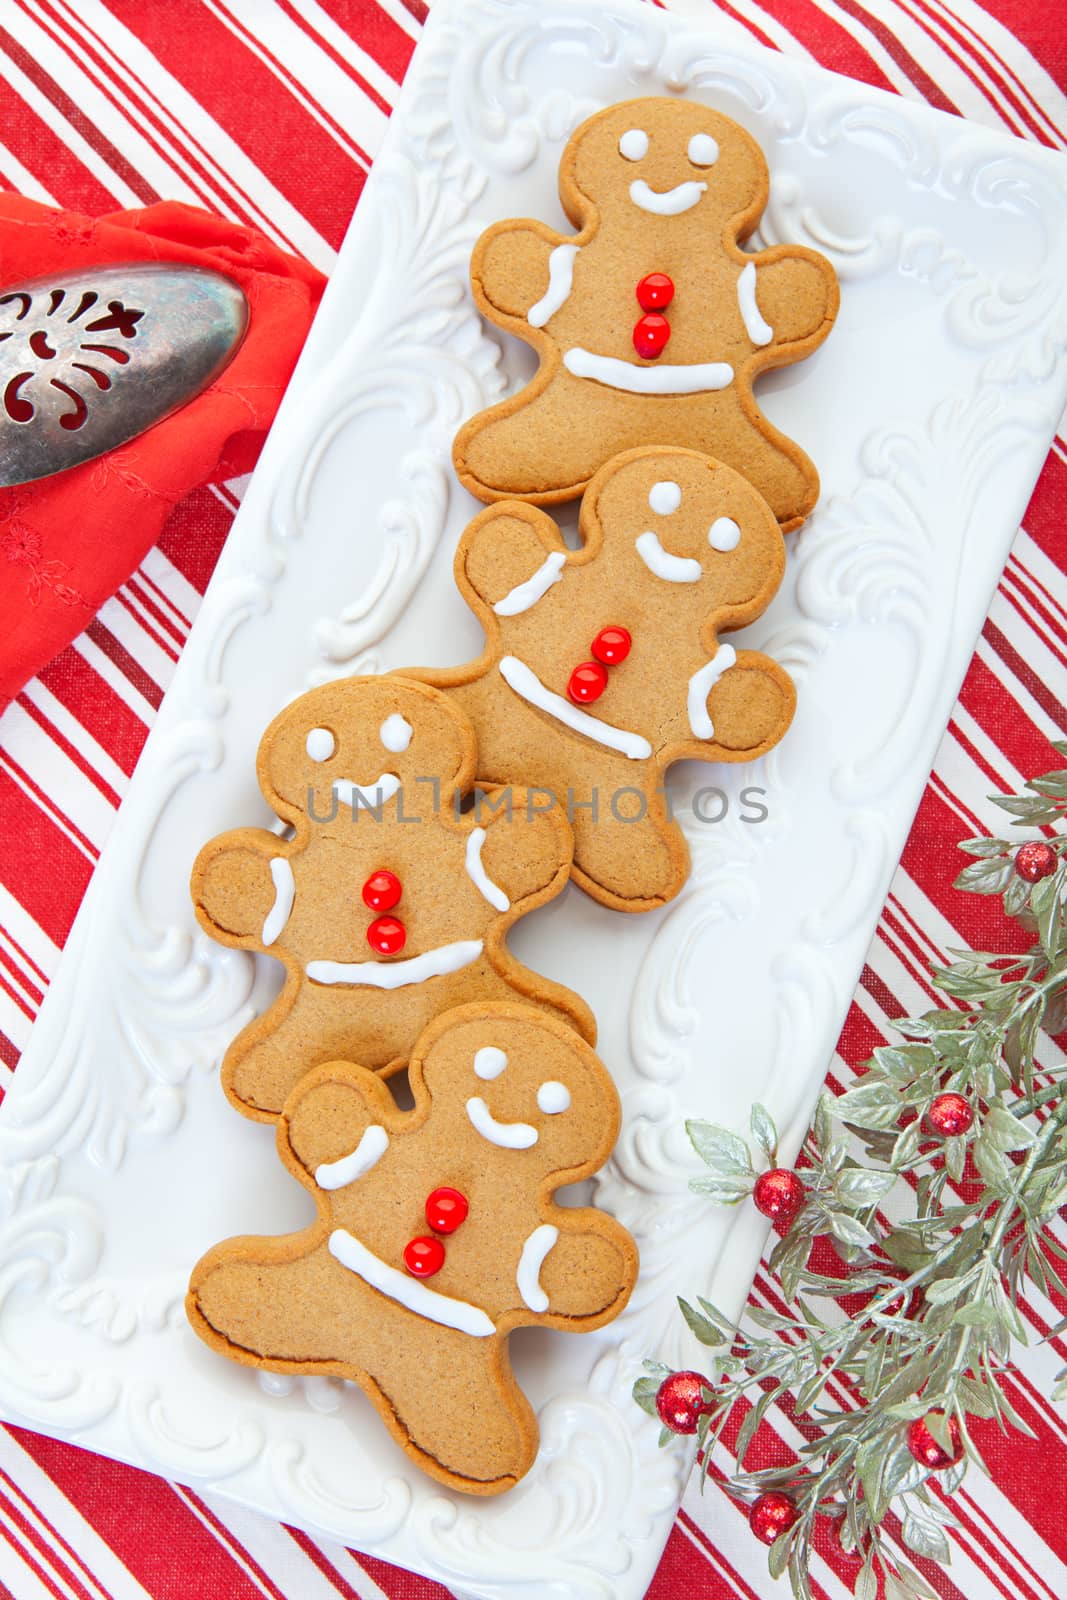 Plate of Gingerbread Men by songbird839